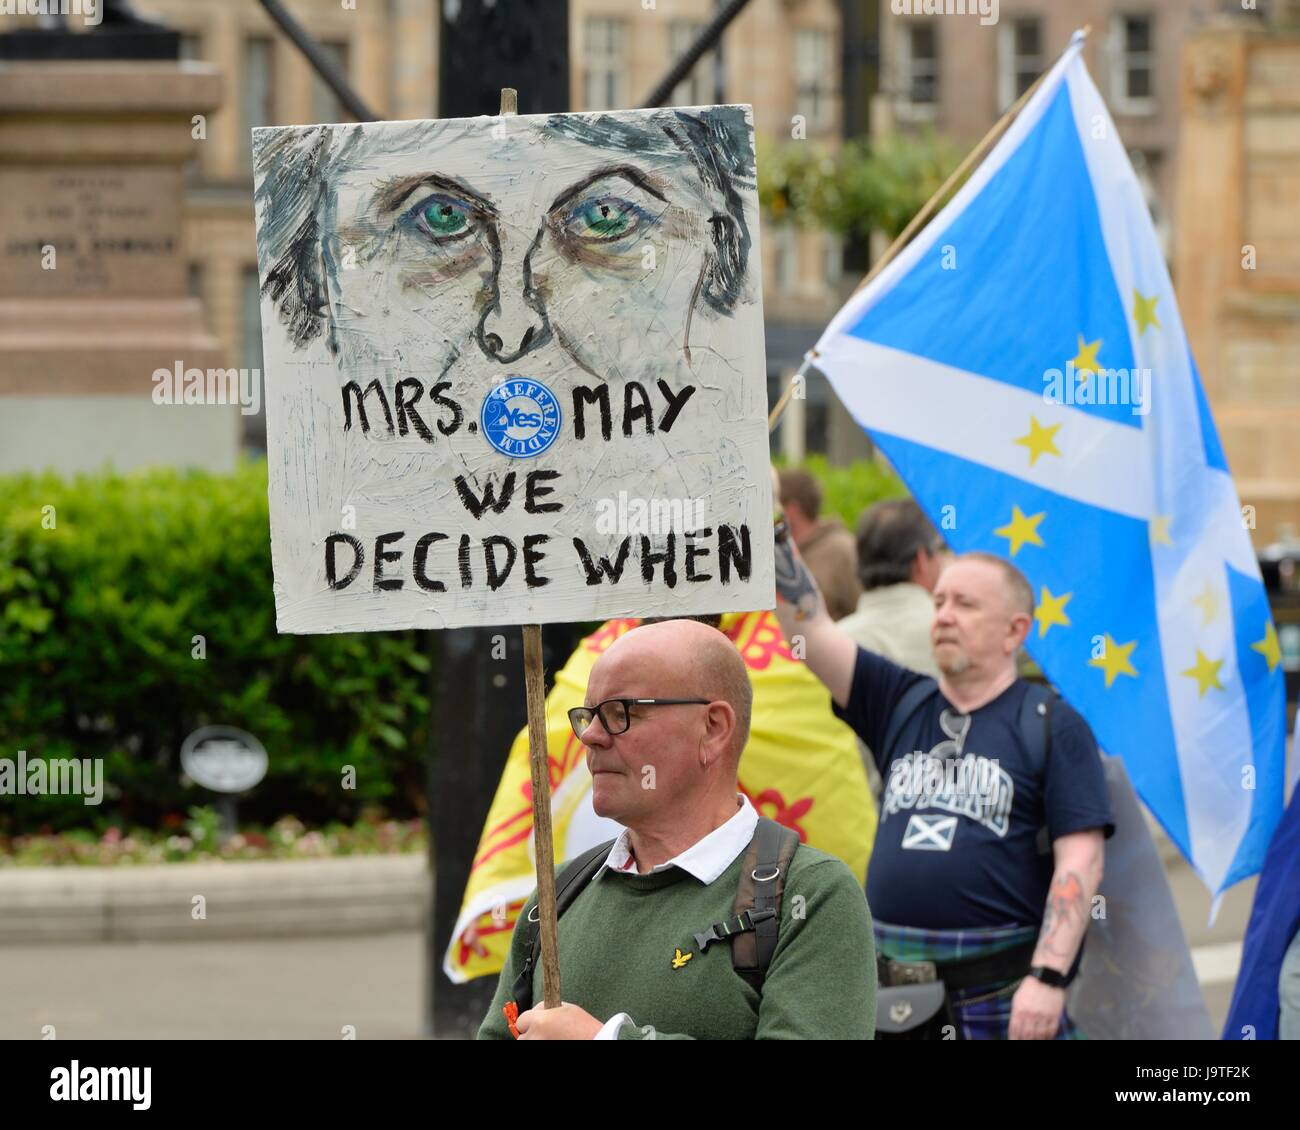 Glasgow, UK. 3rd June, 2017. Scottish Independence march. An estimated 20,000 people gathered to march through Glasgow in support of a push for Scottish independence. Stock Photo